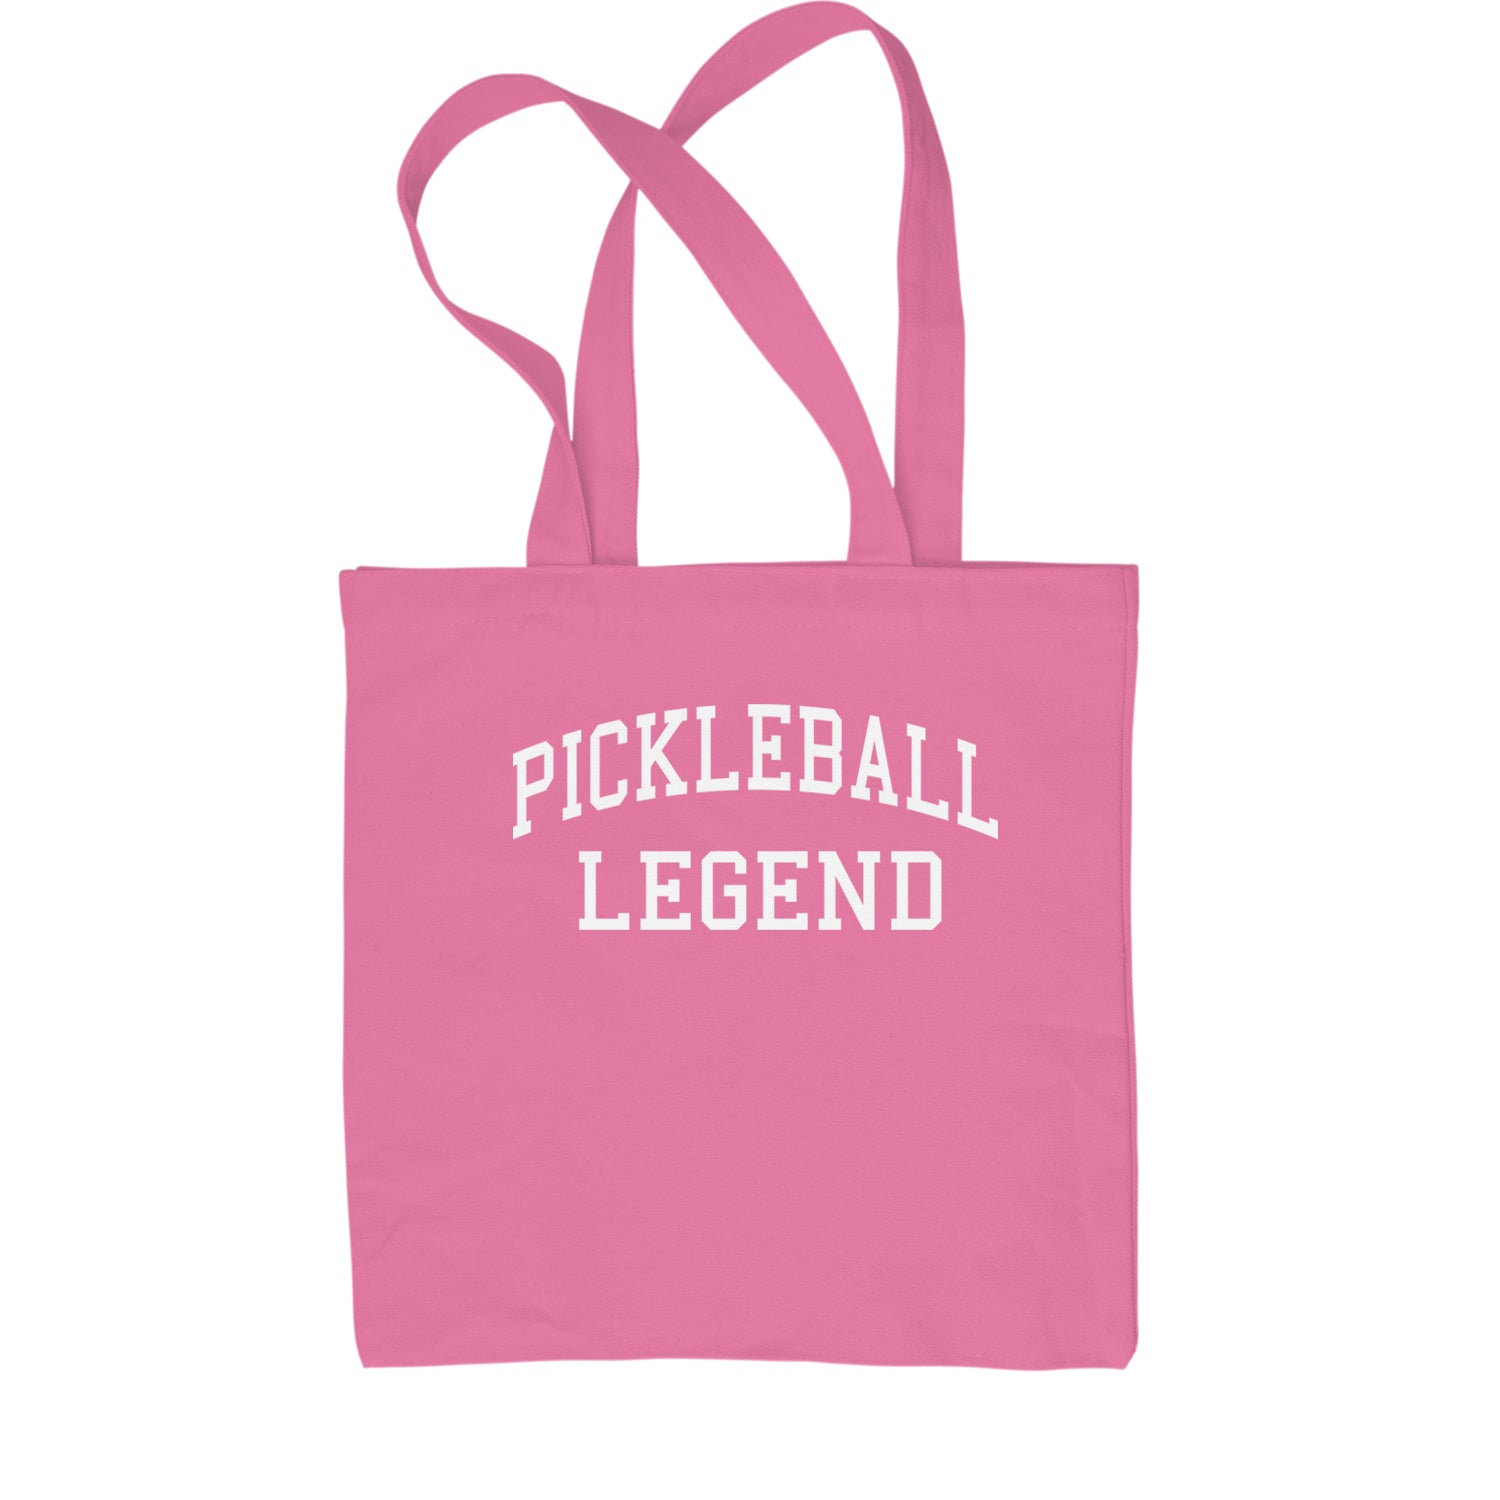 Pickleball Legend Shopping Tote Bag ball, dink, dinking, pickle, pickleball by Expression Tees